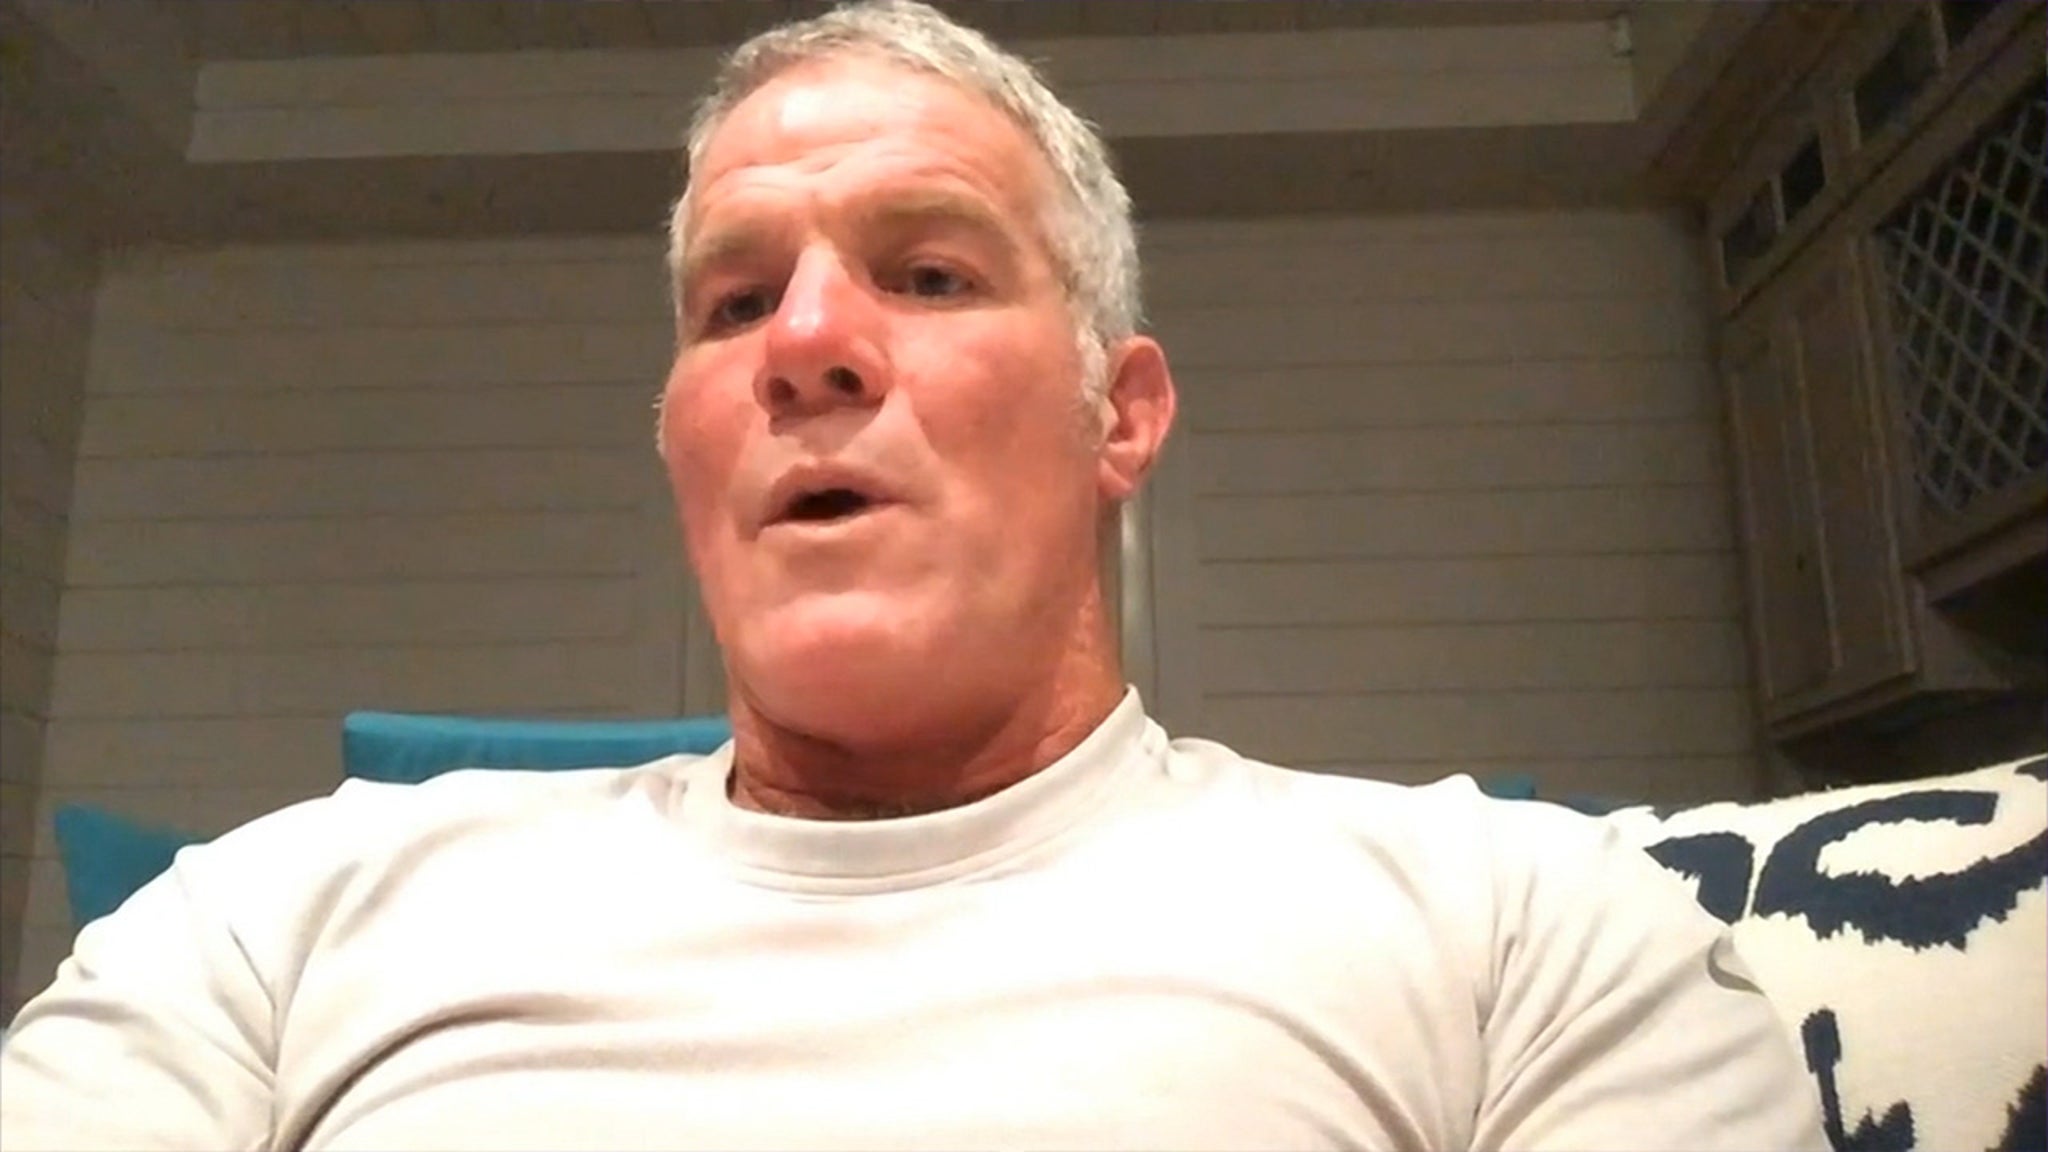 Brett Favre On Joining New Team In His 40s, Excitement and Anxiety! 